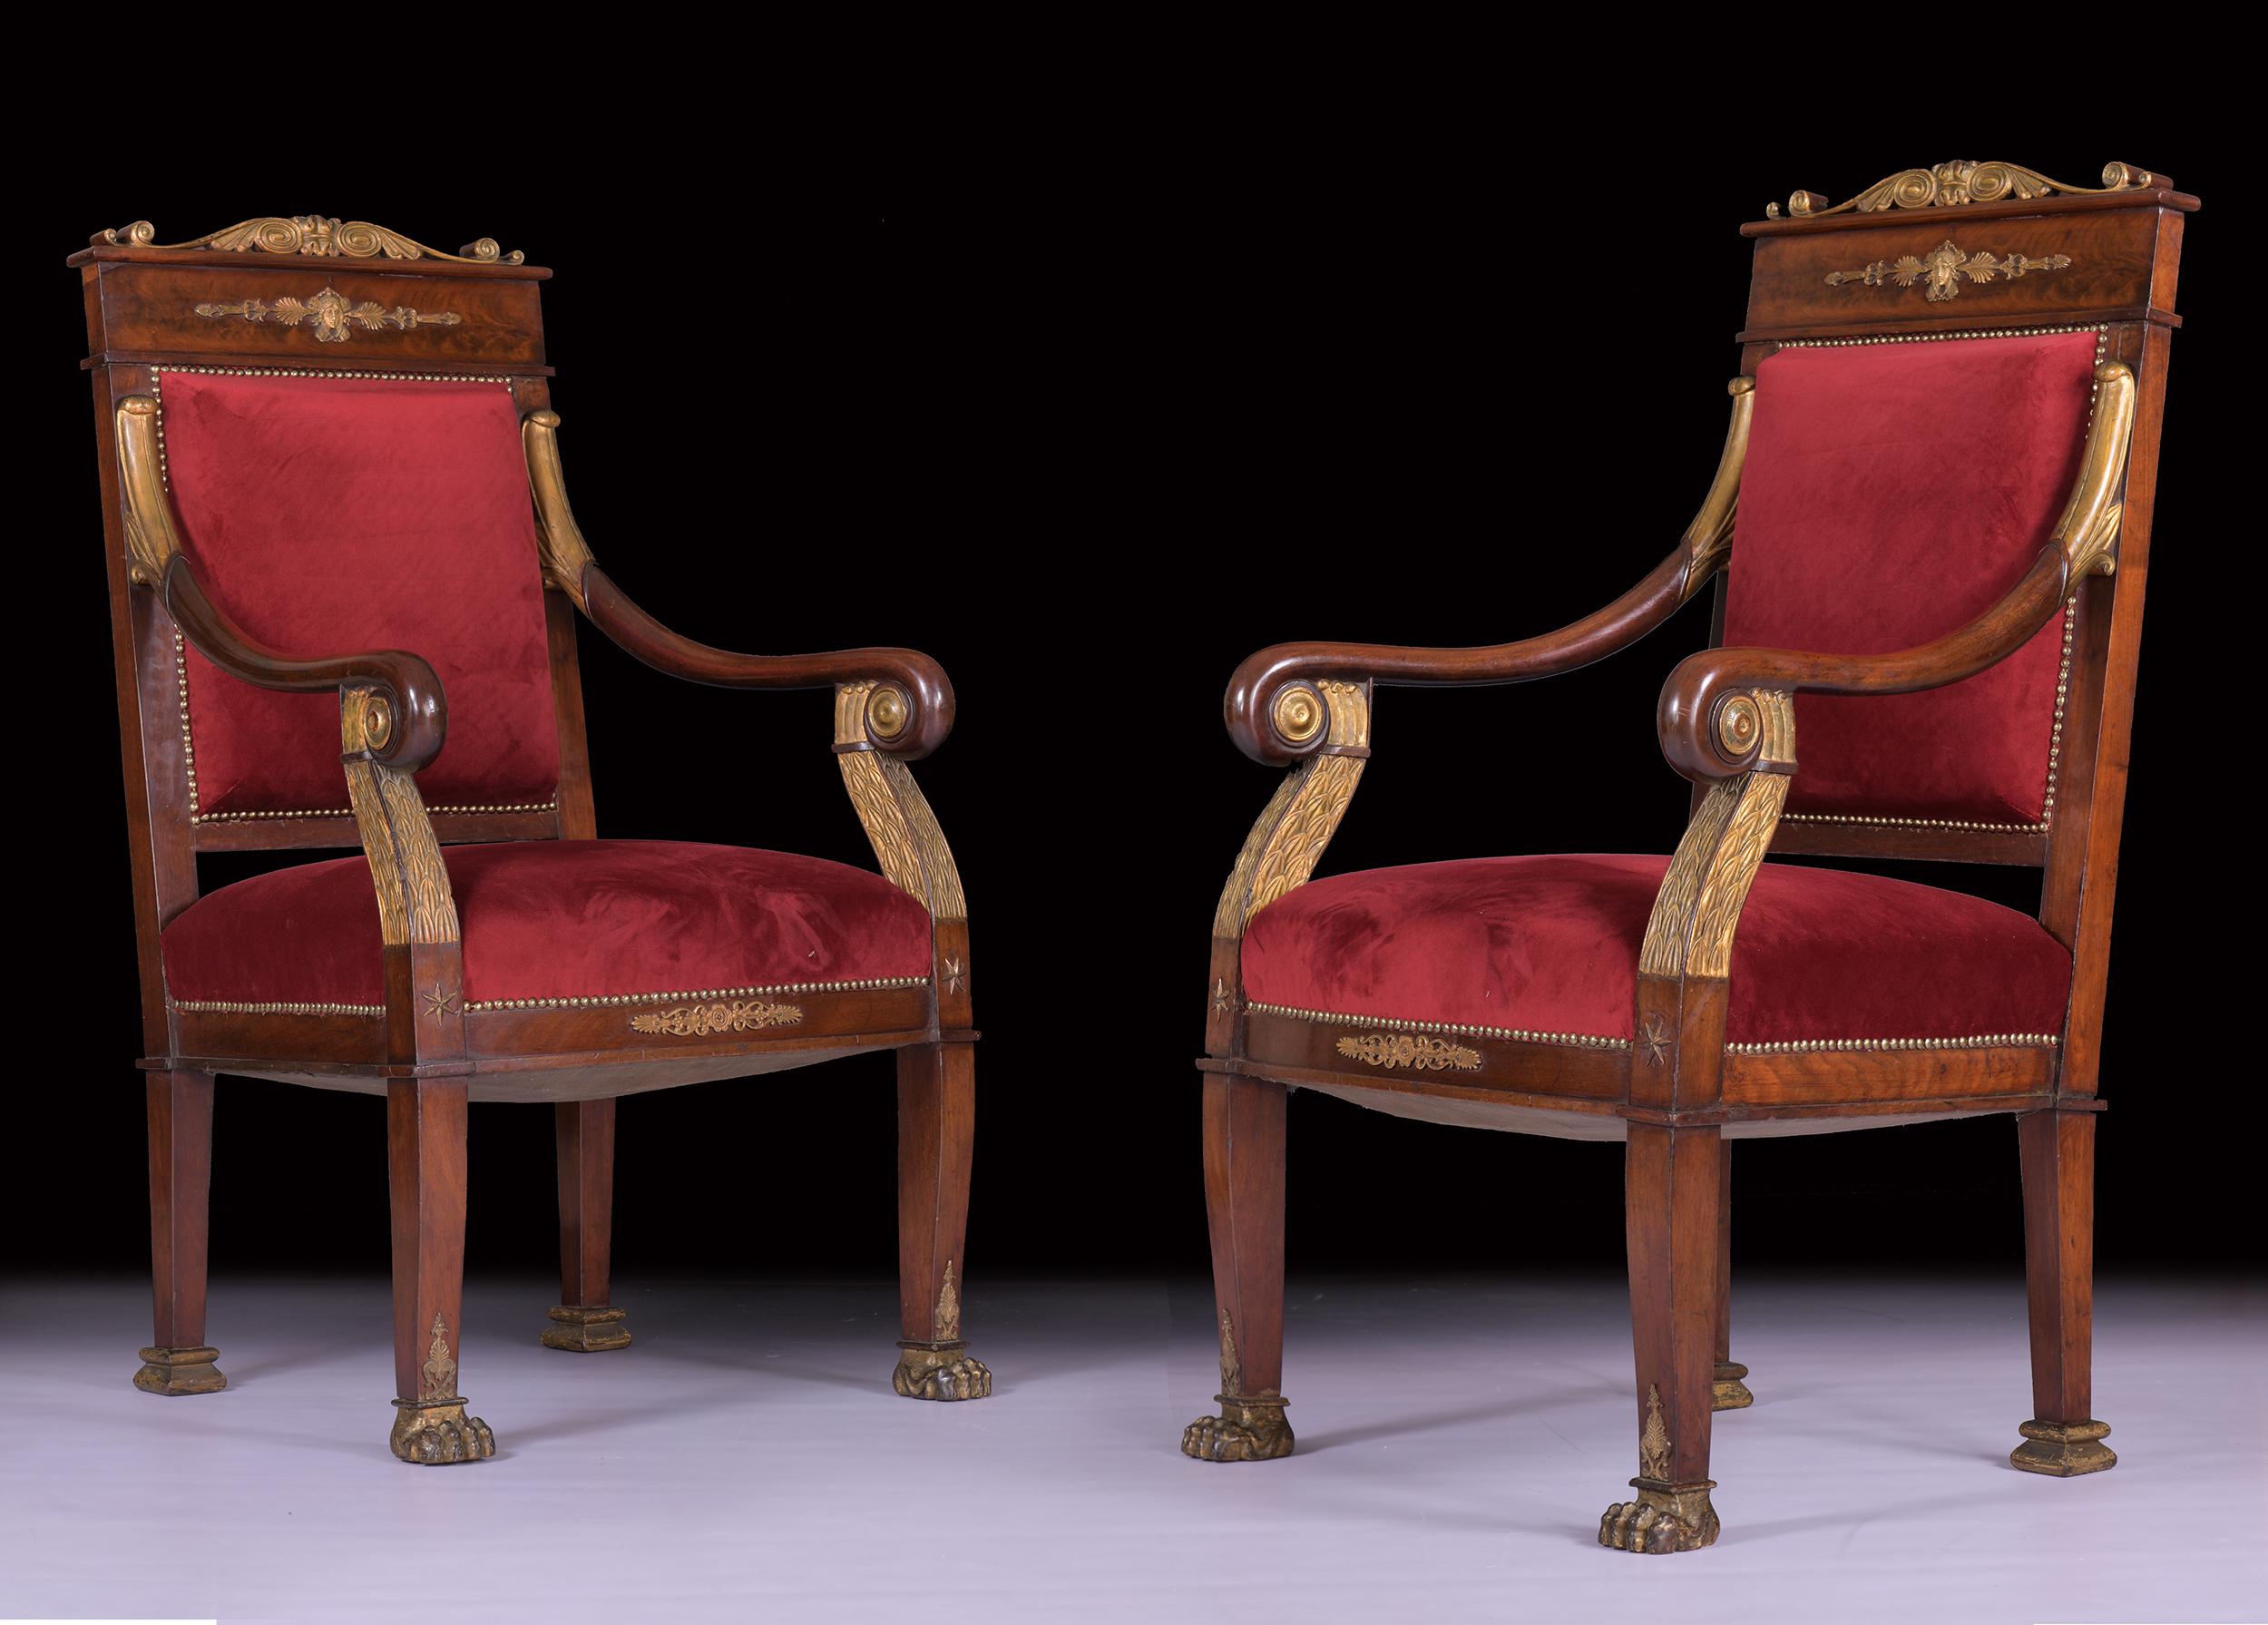 An exceptional pair of early 19th century French Empire mahogany armchairs with ormolu mounts attributed to Jacob-Desmalter (1770-1841) , upholstered in a striking deep red velvet, raised on square tapered legs that terminate in carved paw